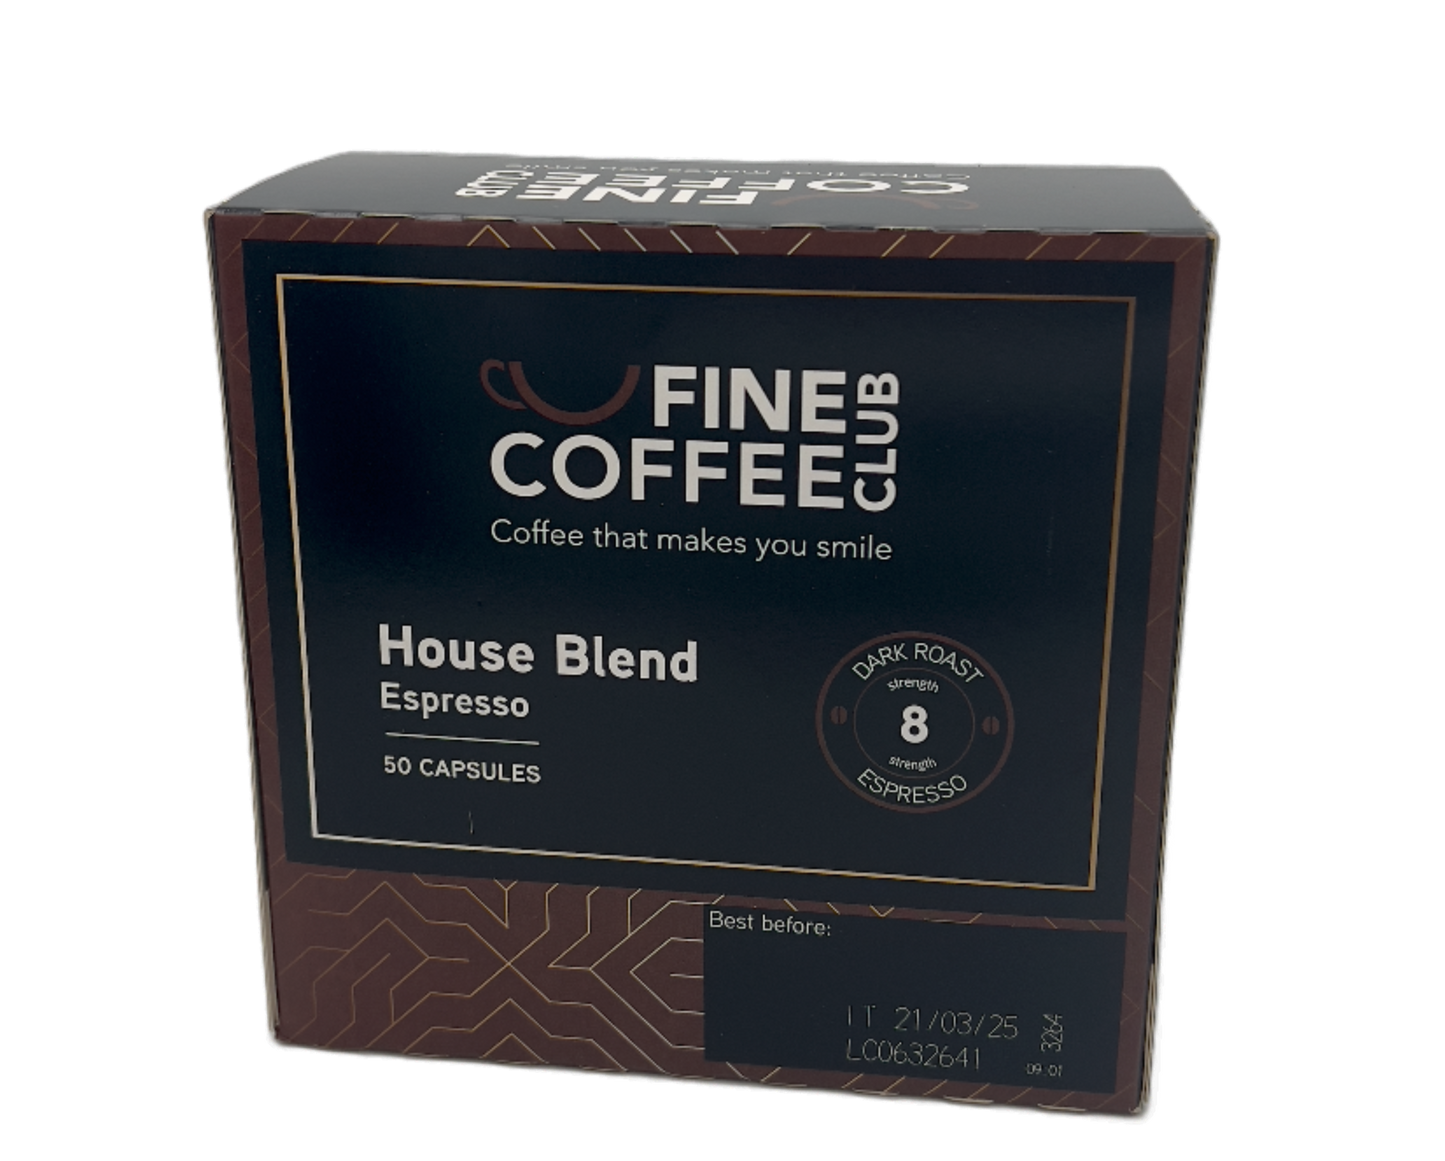 House Blend (50 capsules)